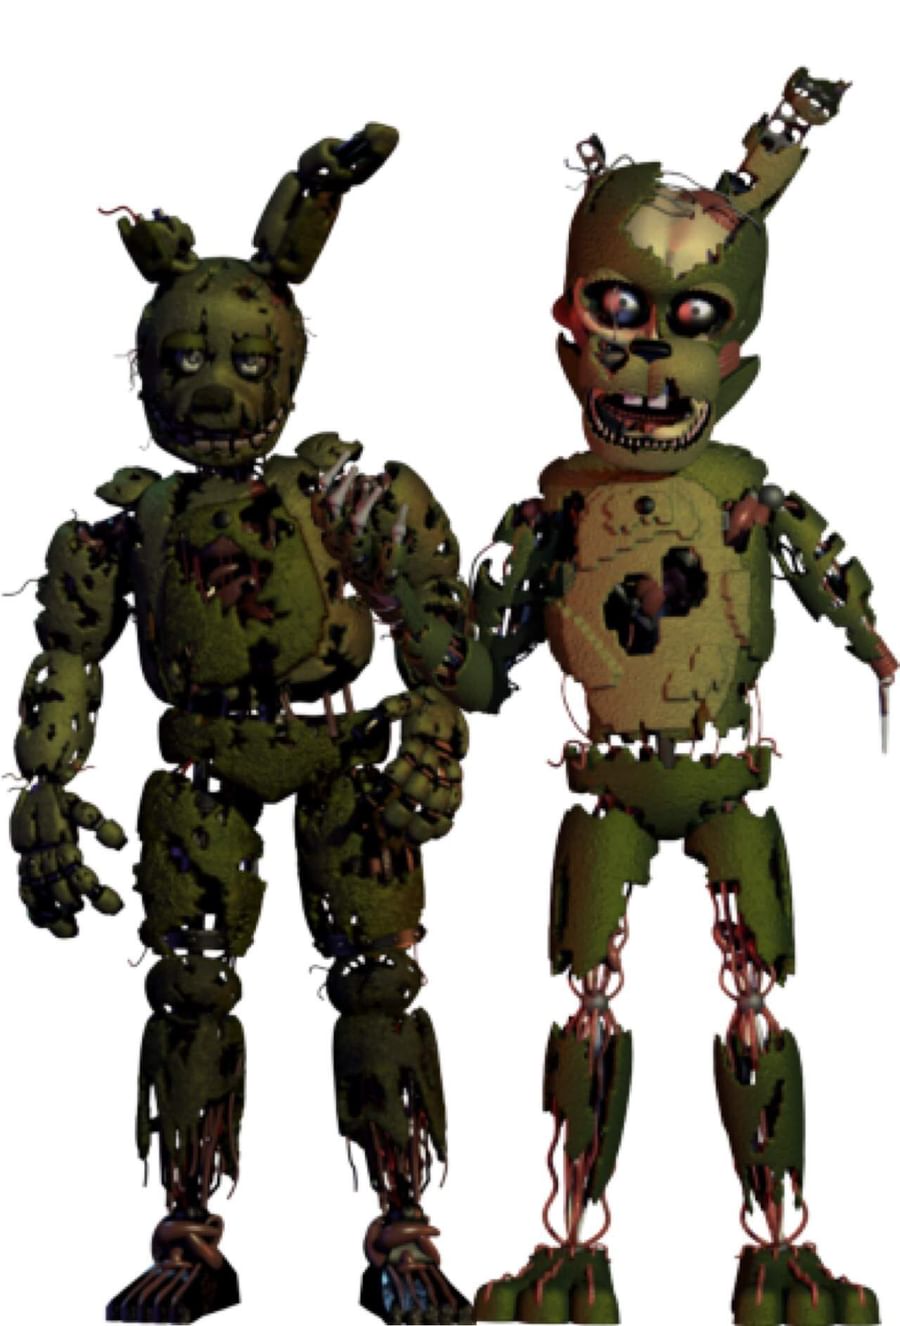 I need someone to explain to me what Scraptrap is. 